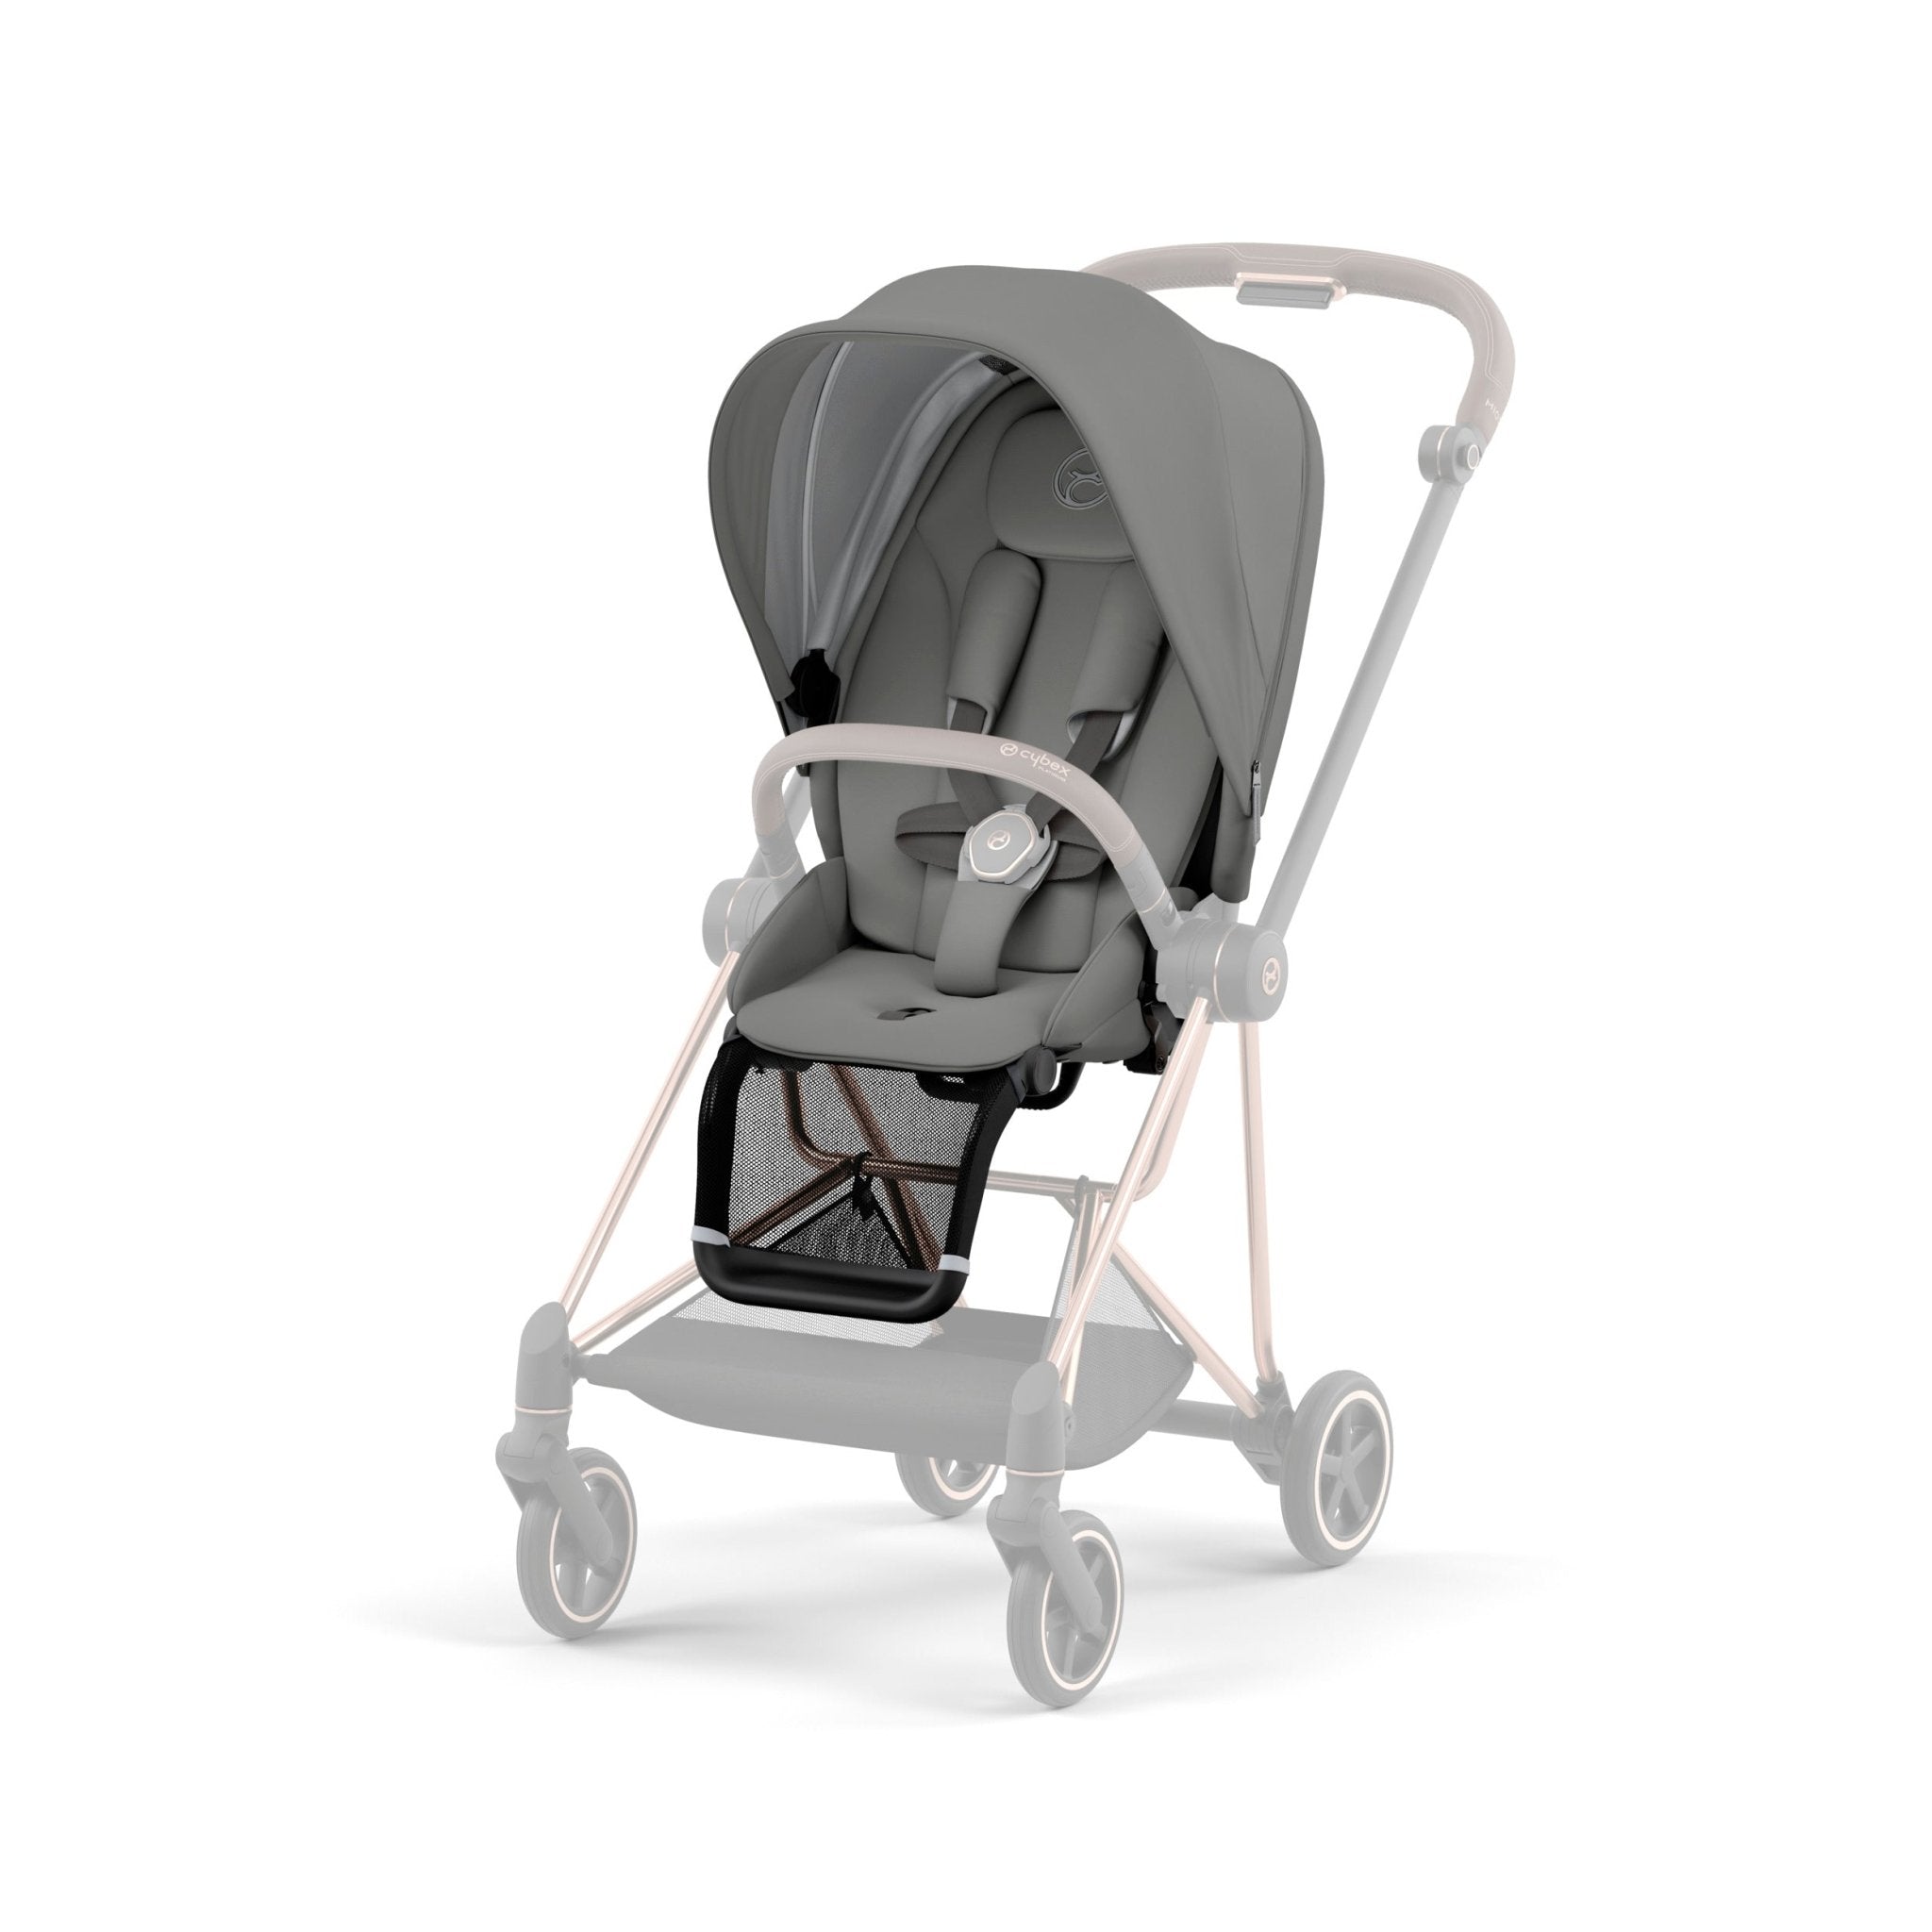 Cybex Mios 3 Seat Pack - ANB Baby -$100 - $300